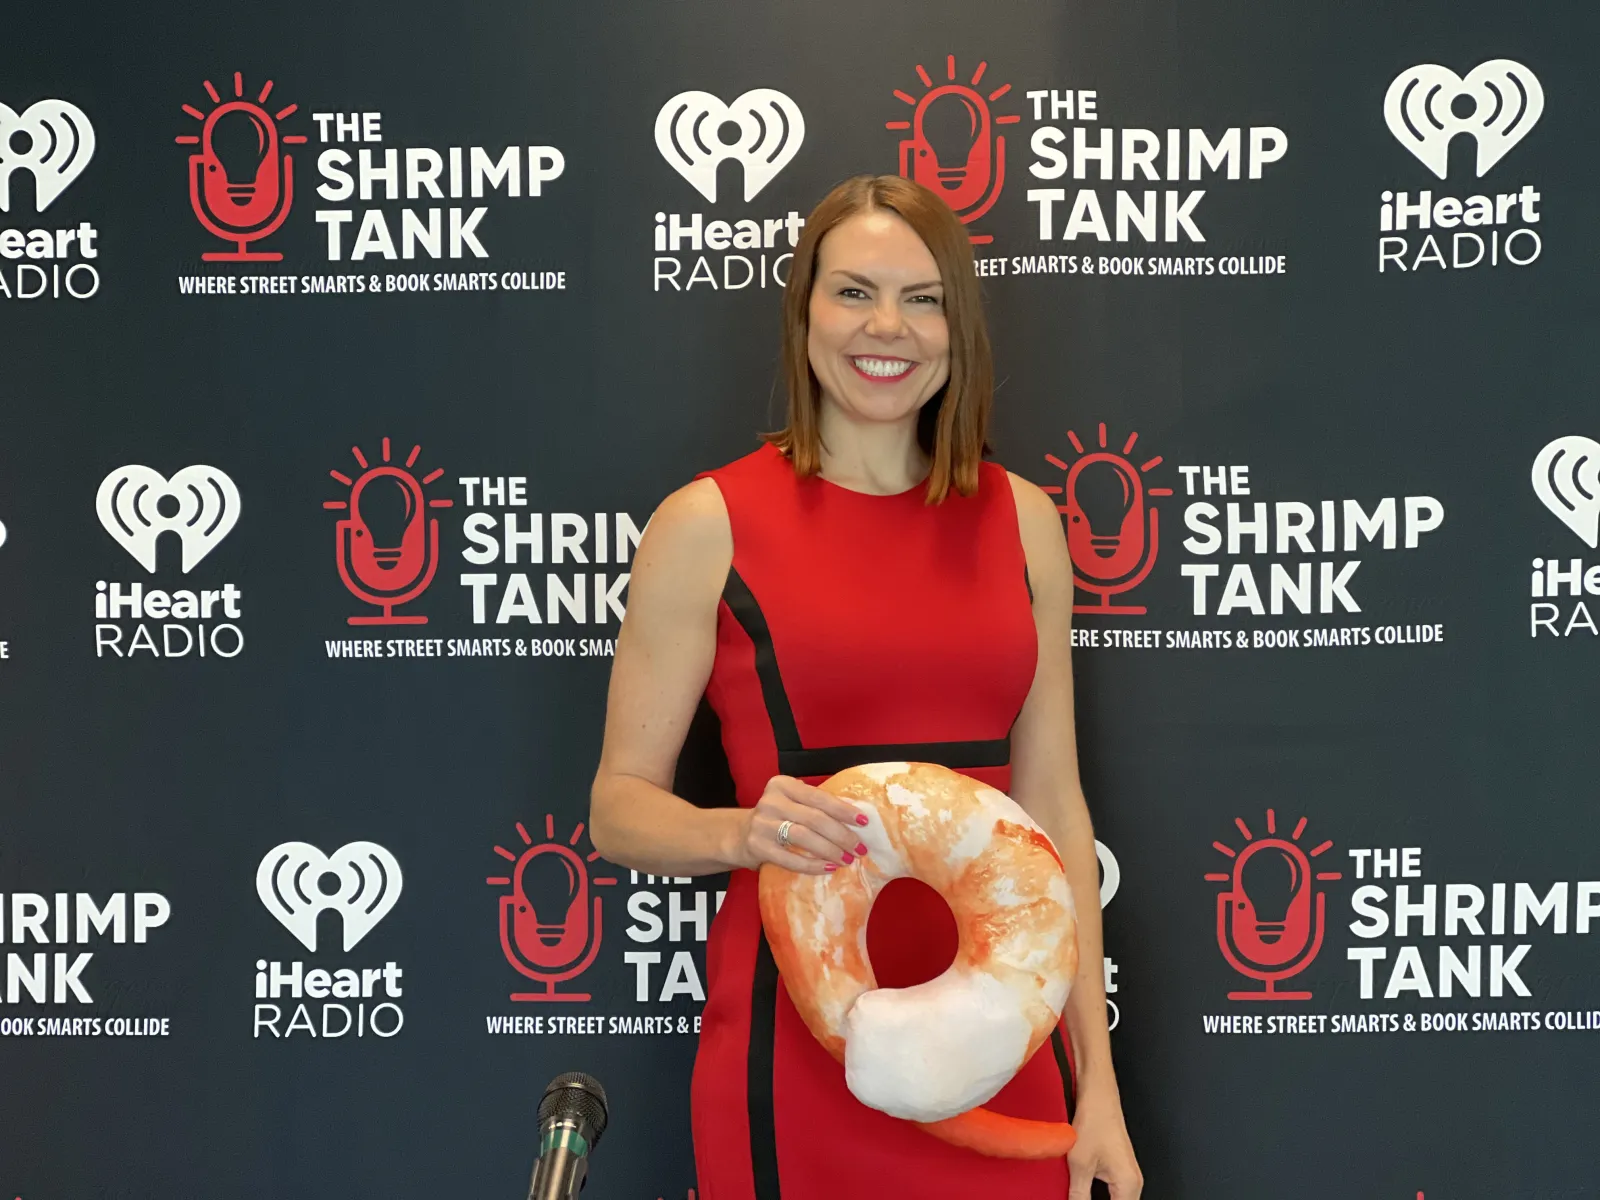 Kate Volman holding a large red and white object